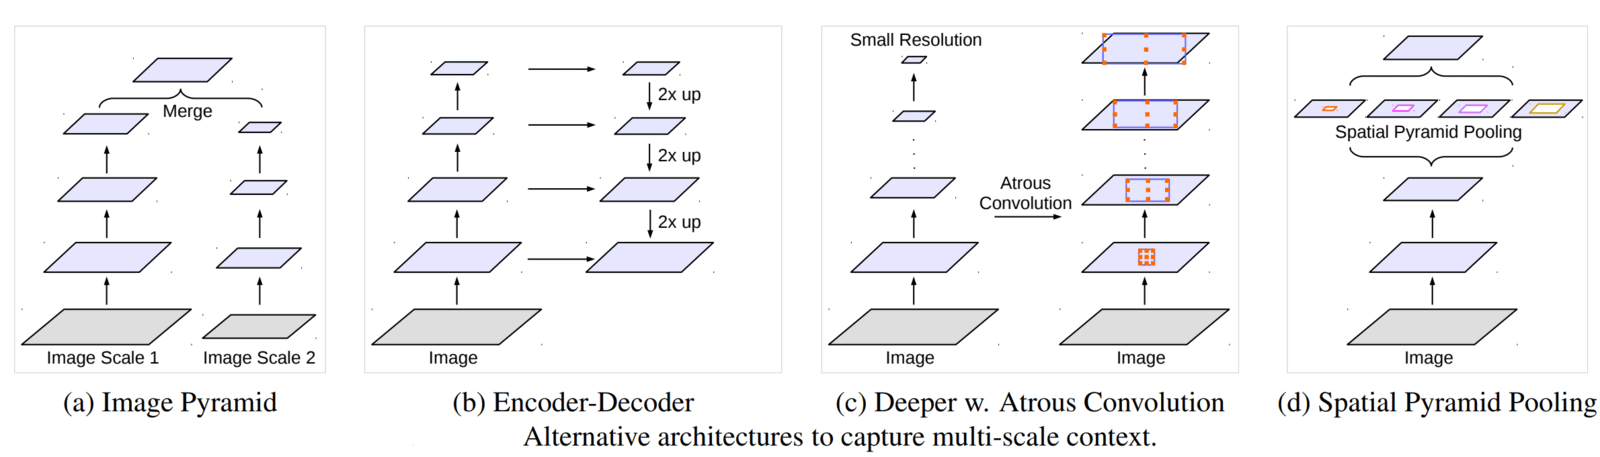 Alternative approaches to the problem of multi-scale object extraction referenced in the Deeplabv3 paper. Deeplabv3+